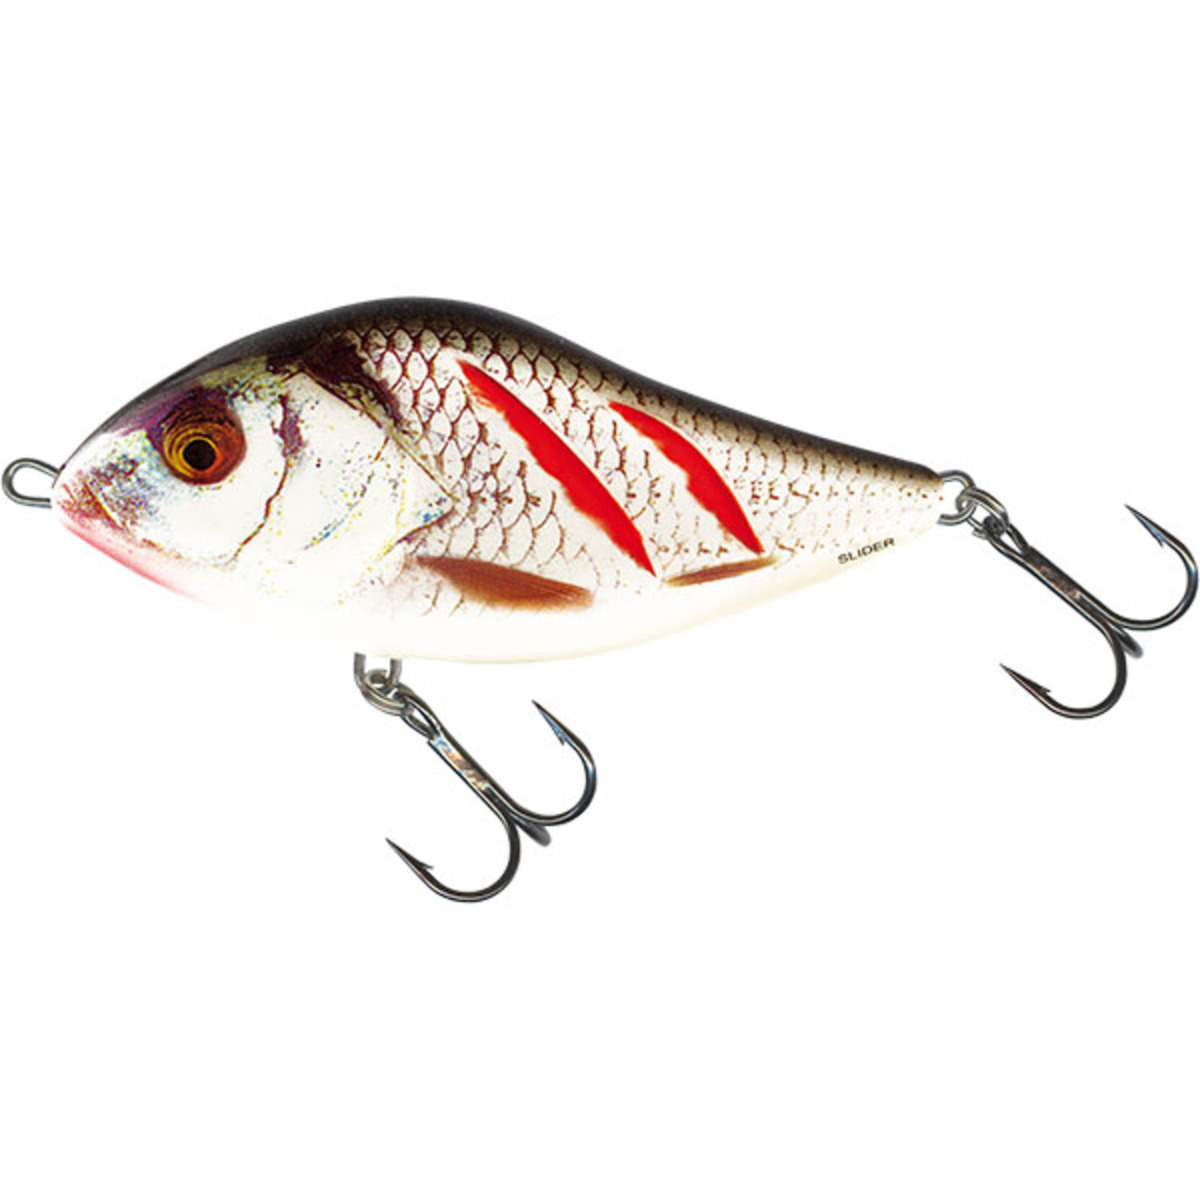 Salmo Slider Sinking - 5 Cm - Wounded Real Grey Shiner